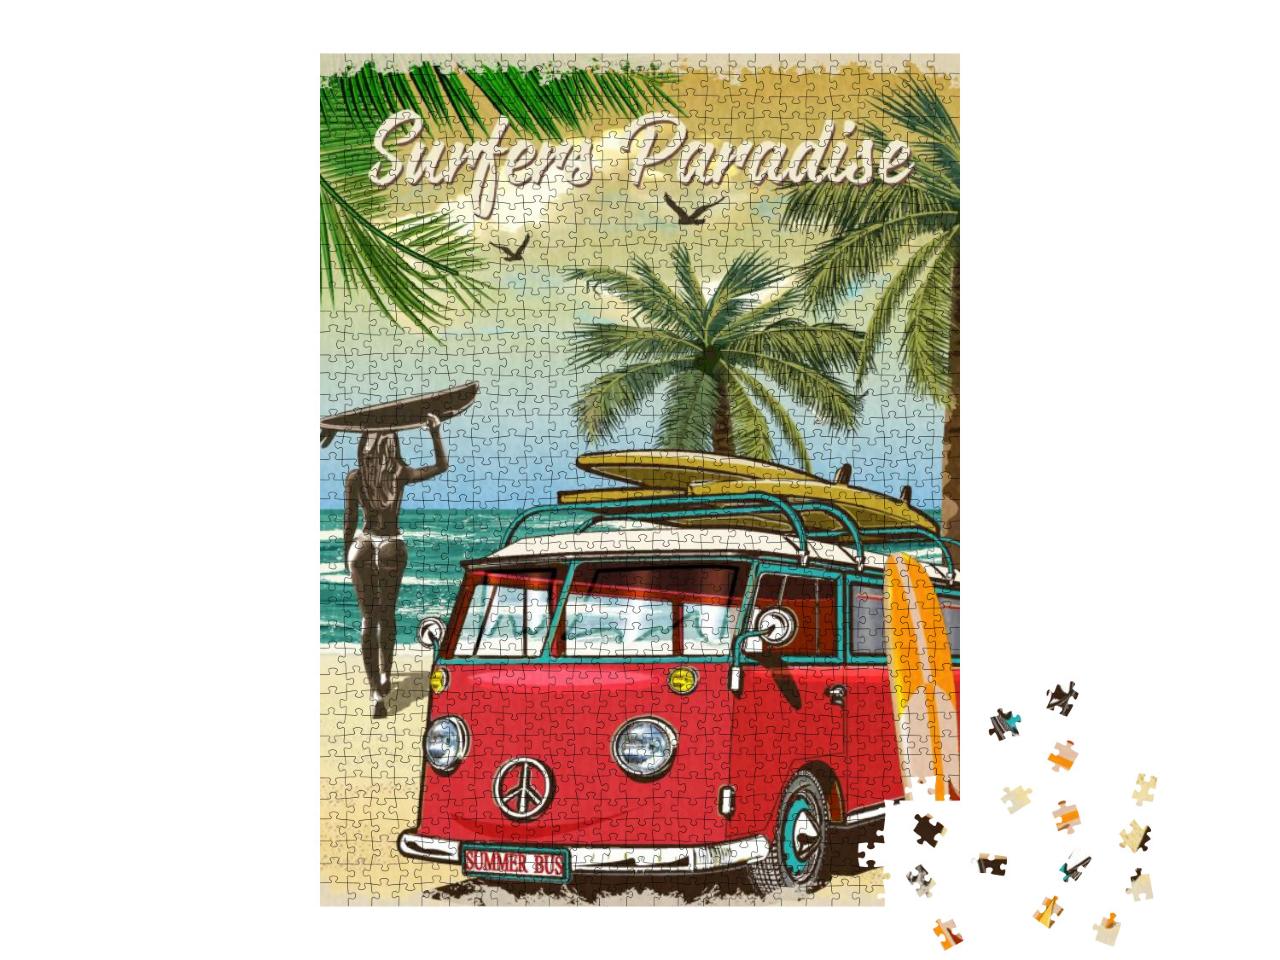 Surf Poster with Retro Bus & Girl Carrying Surfboard... Jigsaw Puzzle with 1000 pieces